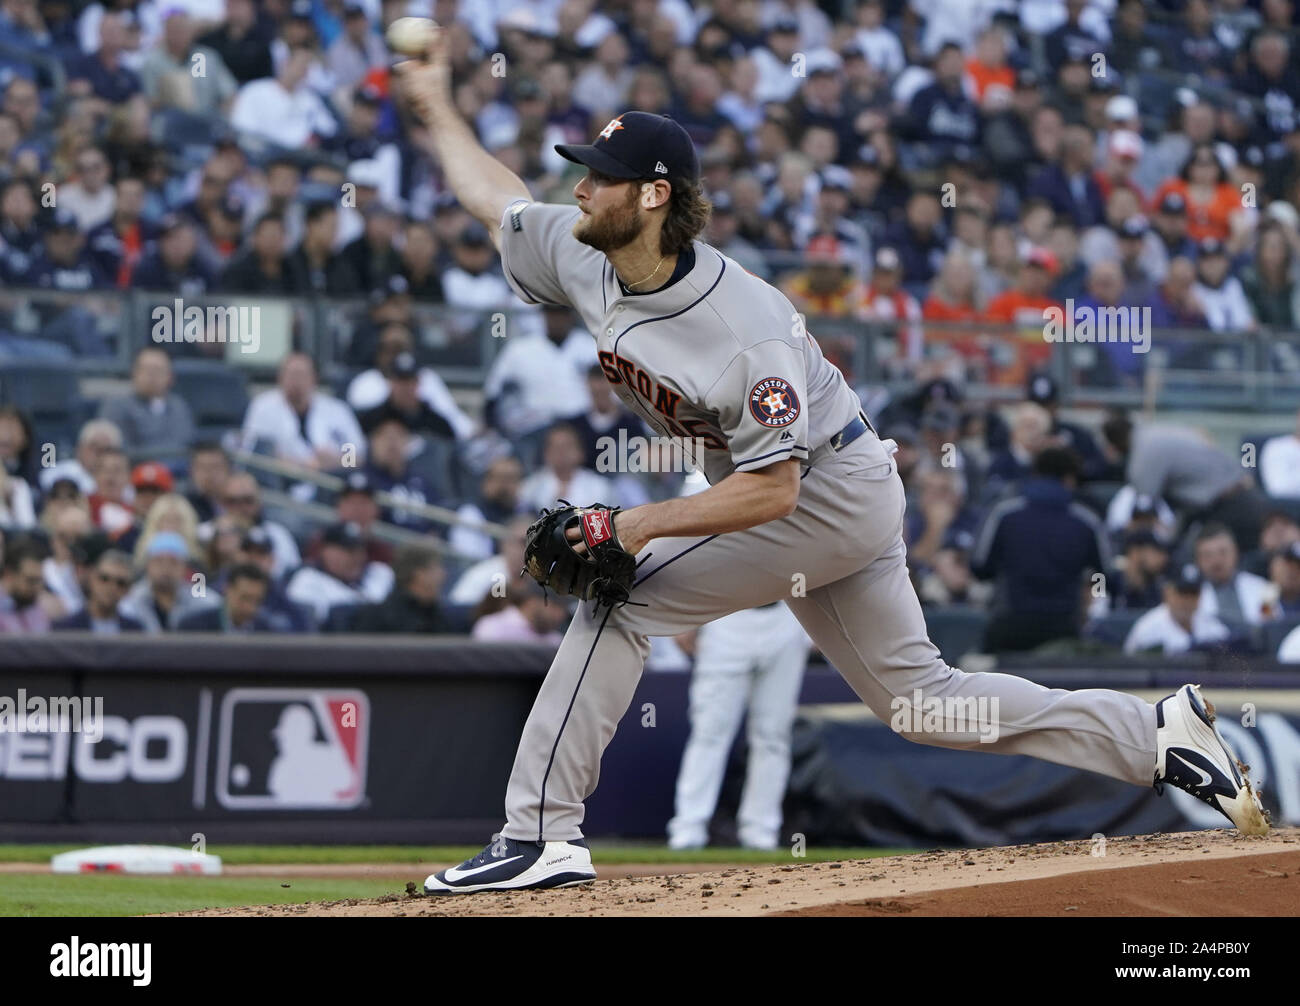 Bronx, United States. 15th Oct, 2019. Houston Astros Gerrit Cole pitches against the New York Yankees in the first inning of Game 3 of their American League Championship Series in the 2019 MLB Playoffs at Yankee Stadium in New York City on October 15, 2019. Photo by Ray Stubblebine/UPI . Credit: UPI/Alamy Live News Stock Photo